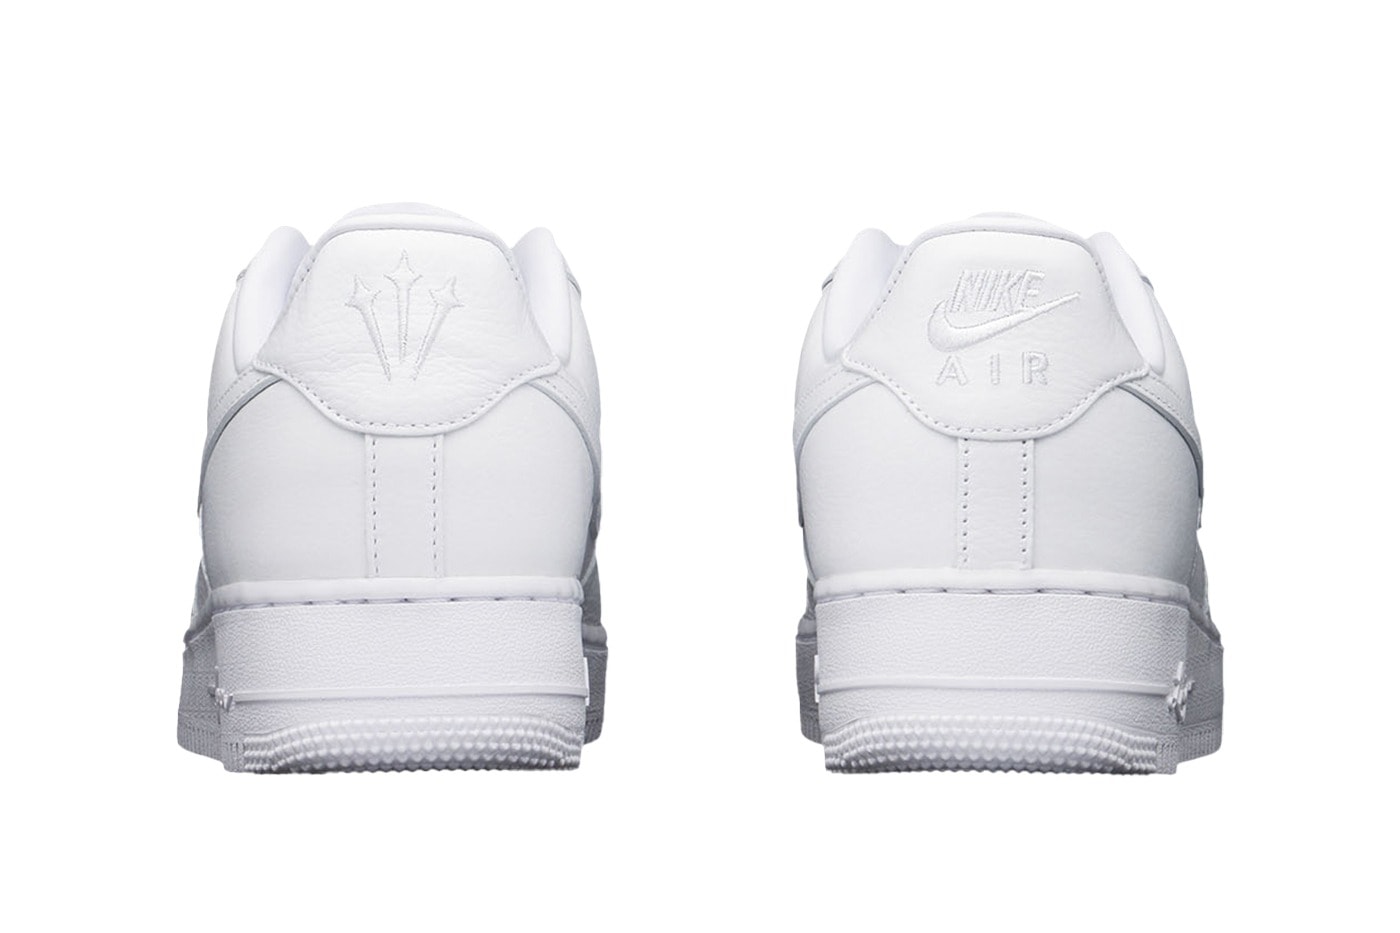 NOCTA x Nike Air Force 1 Low 全新聯名鞋款「Love You Forever」正式登場